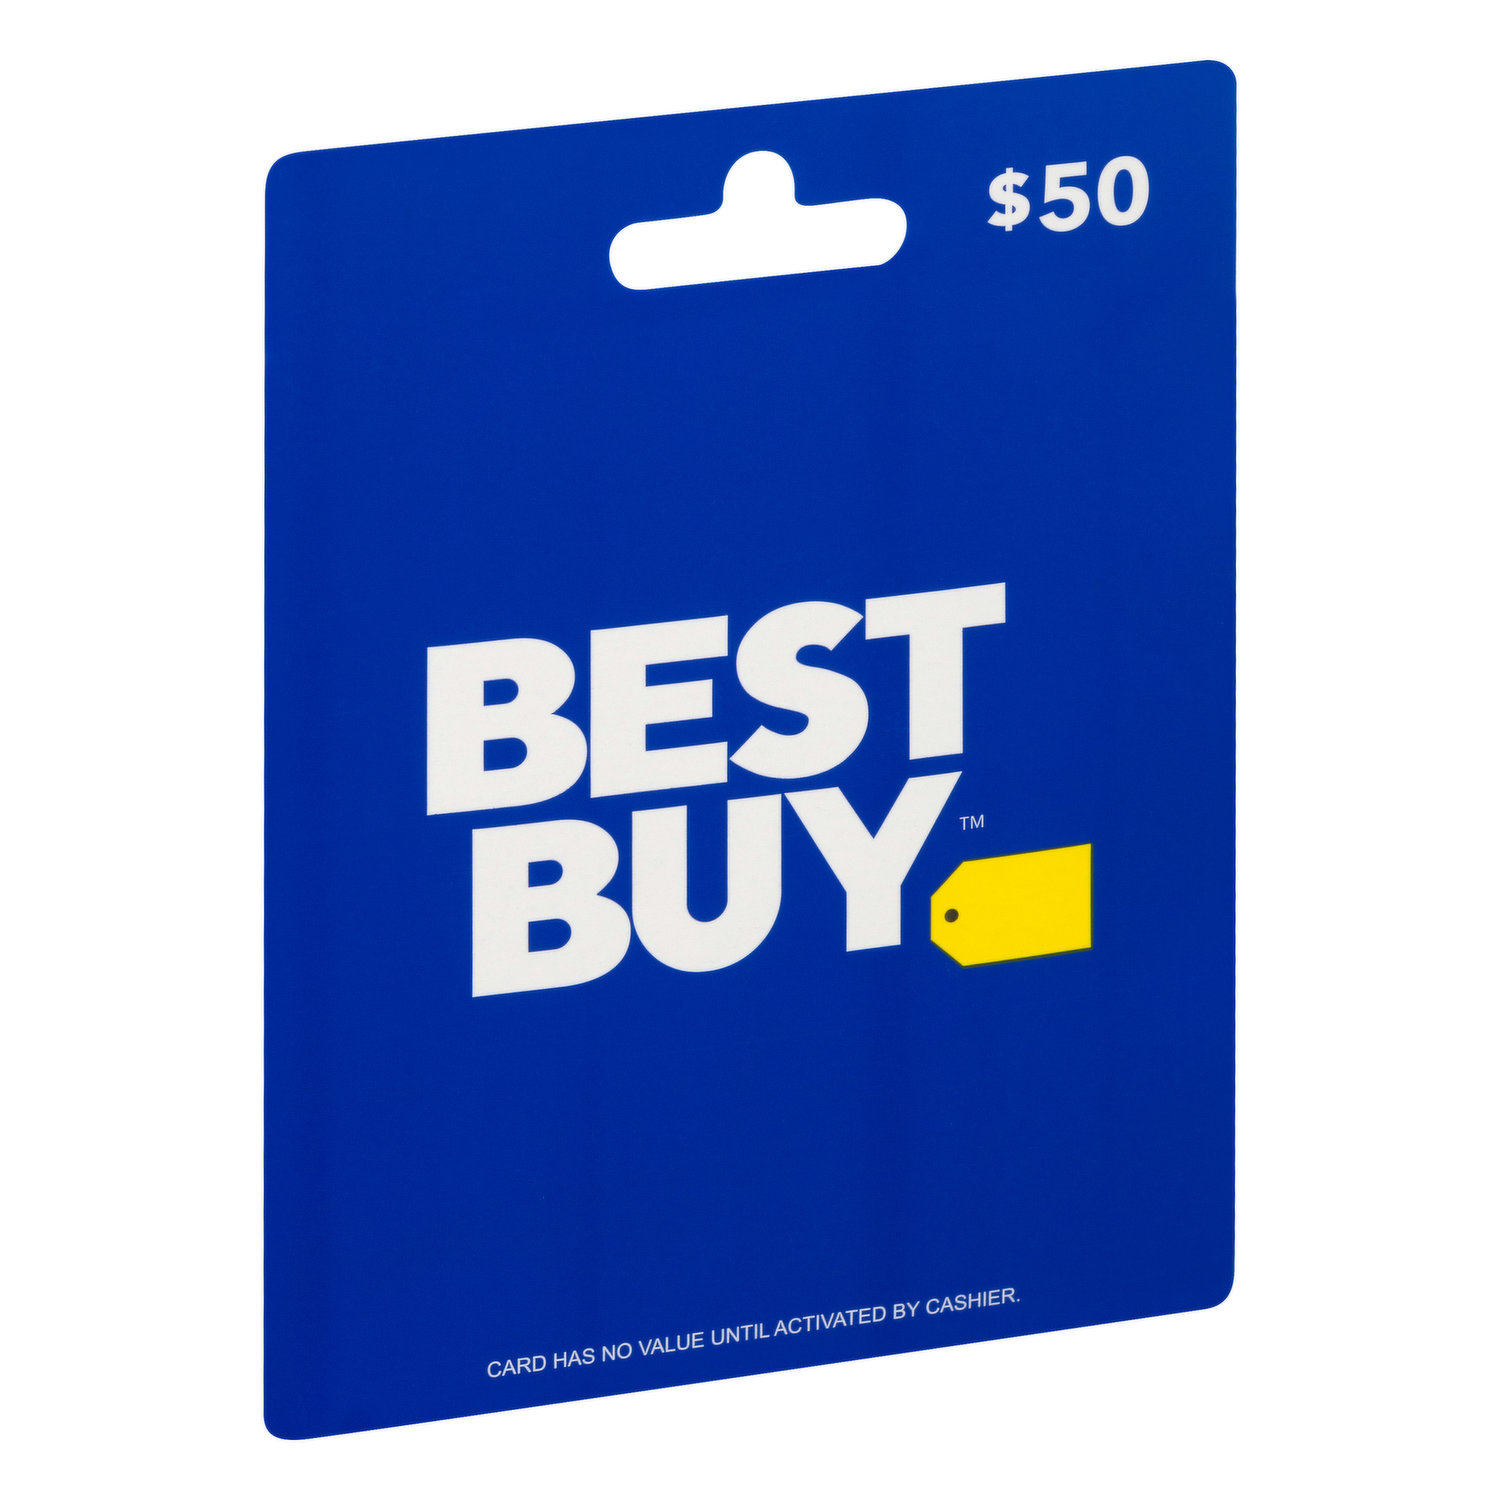 Best gift cards on Amazon: The best holiday gift cards to buy